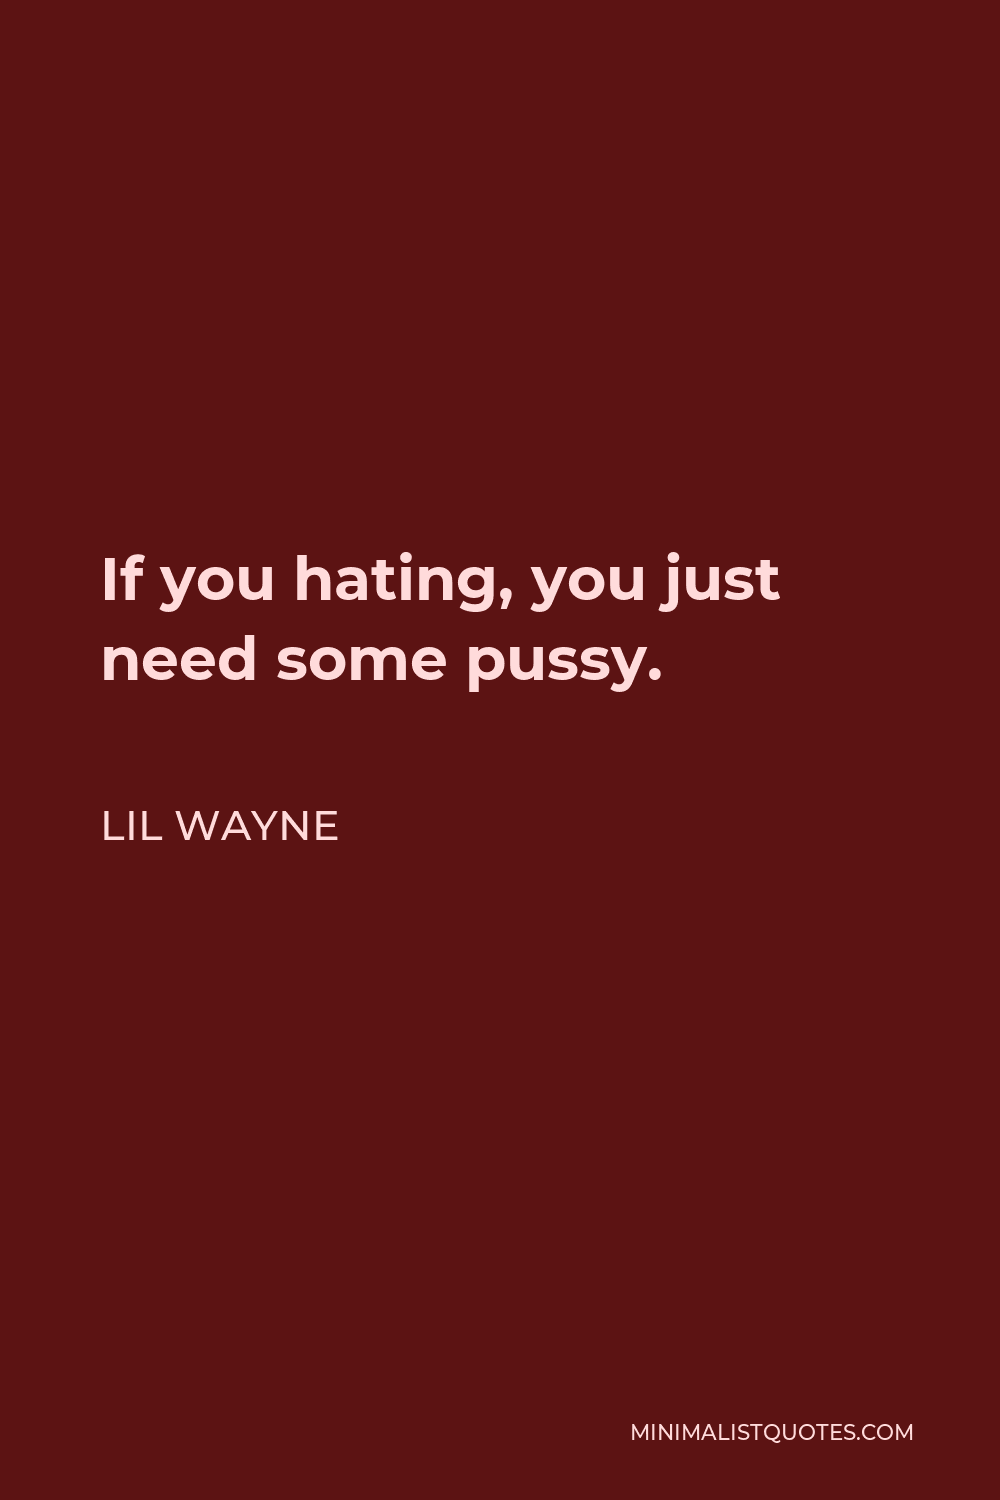 Lil Wayne Quote - If you hating, you just need some pussy.